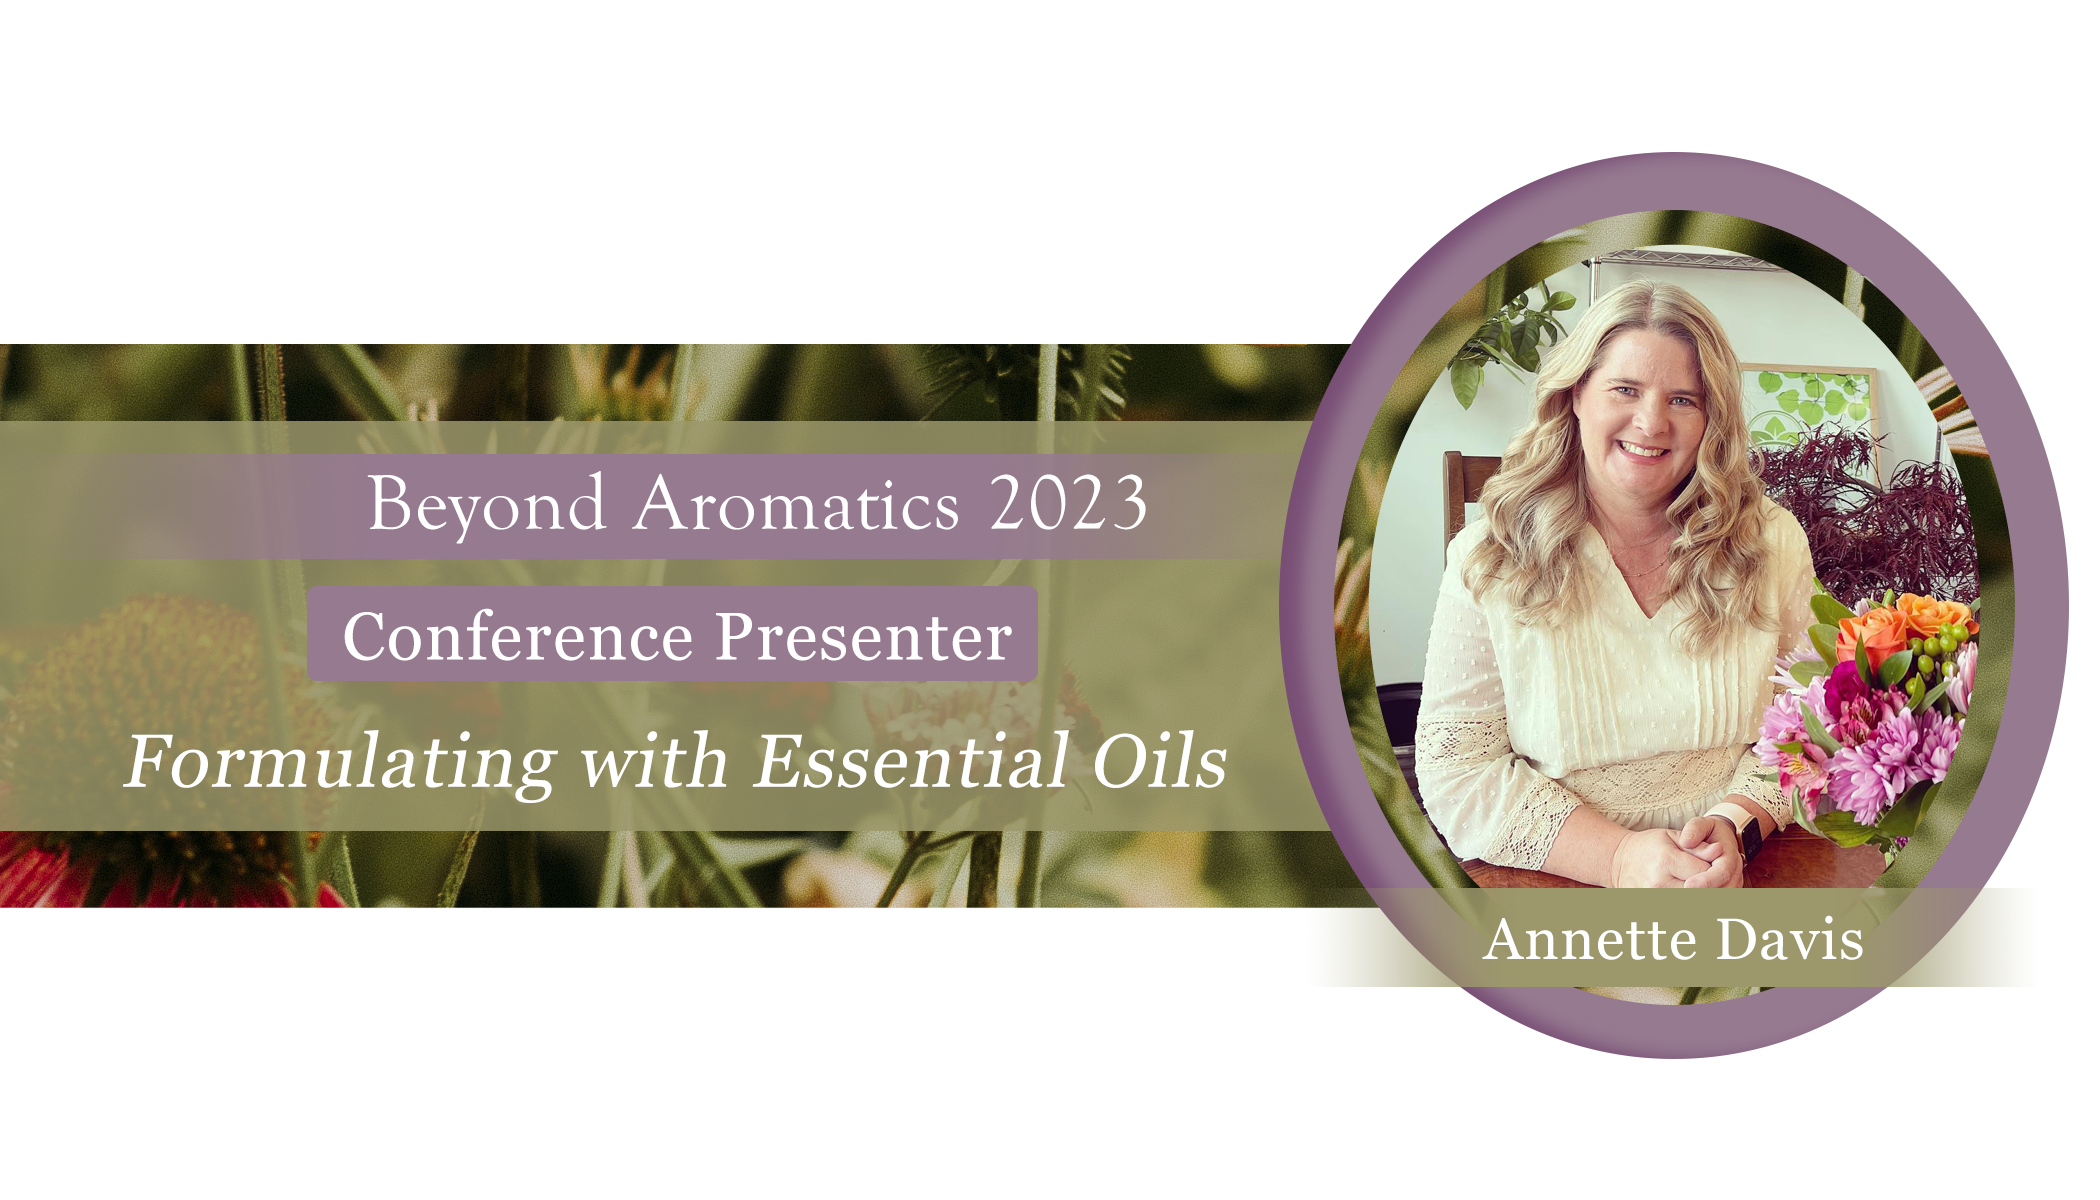 Formulating with Essential Oils